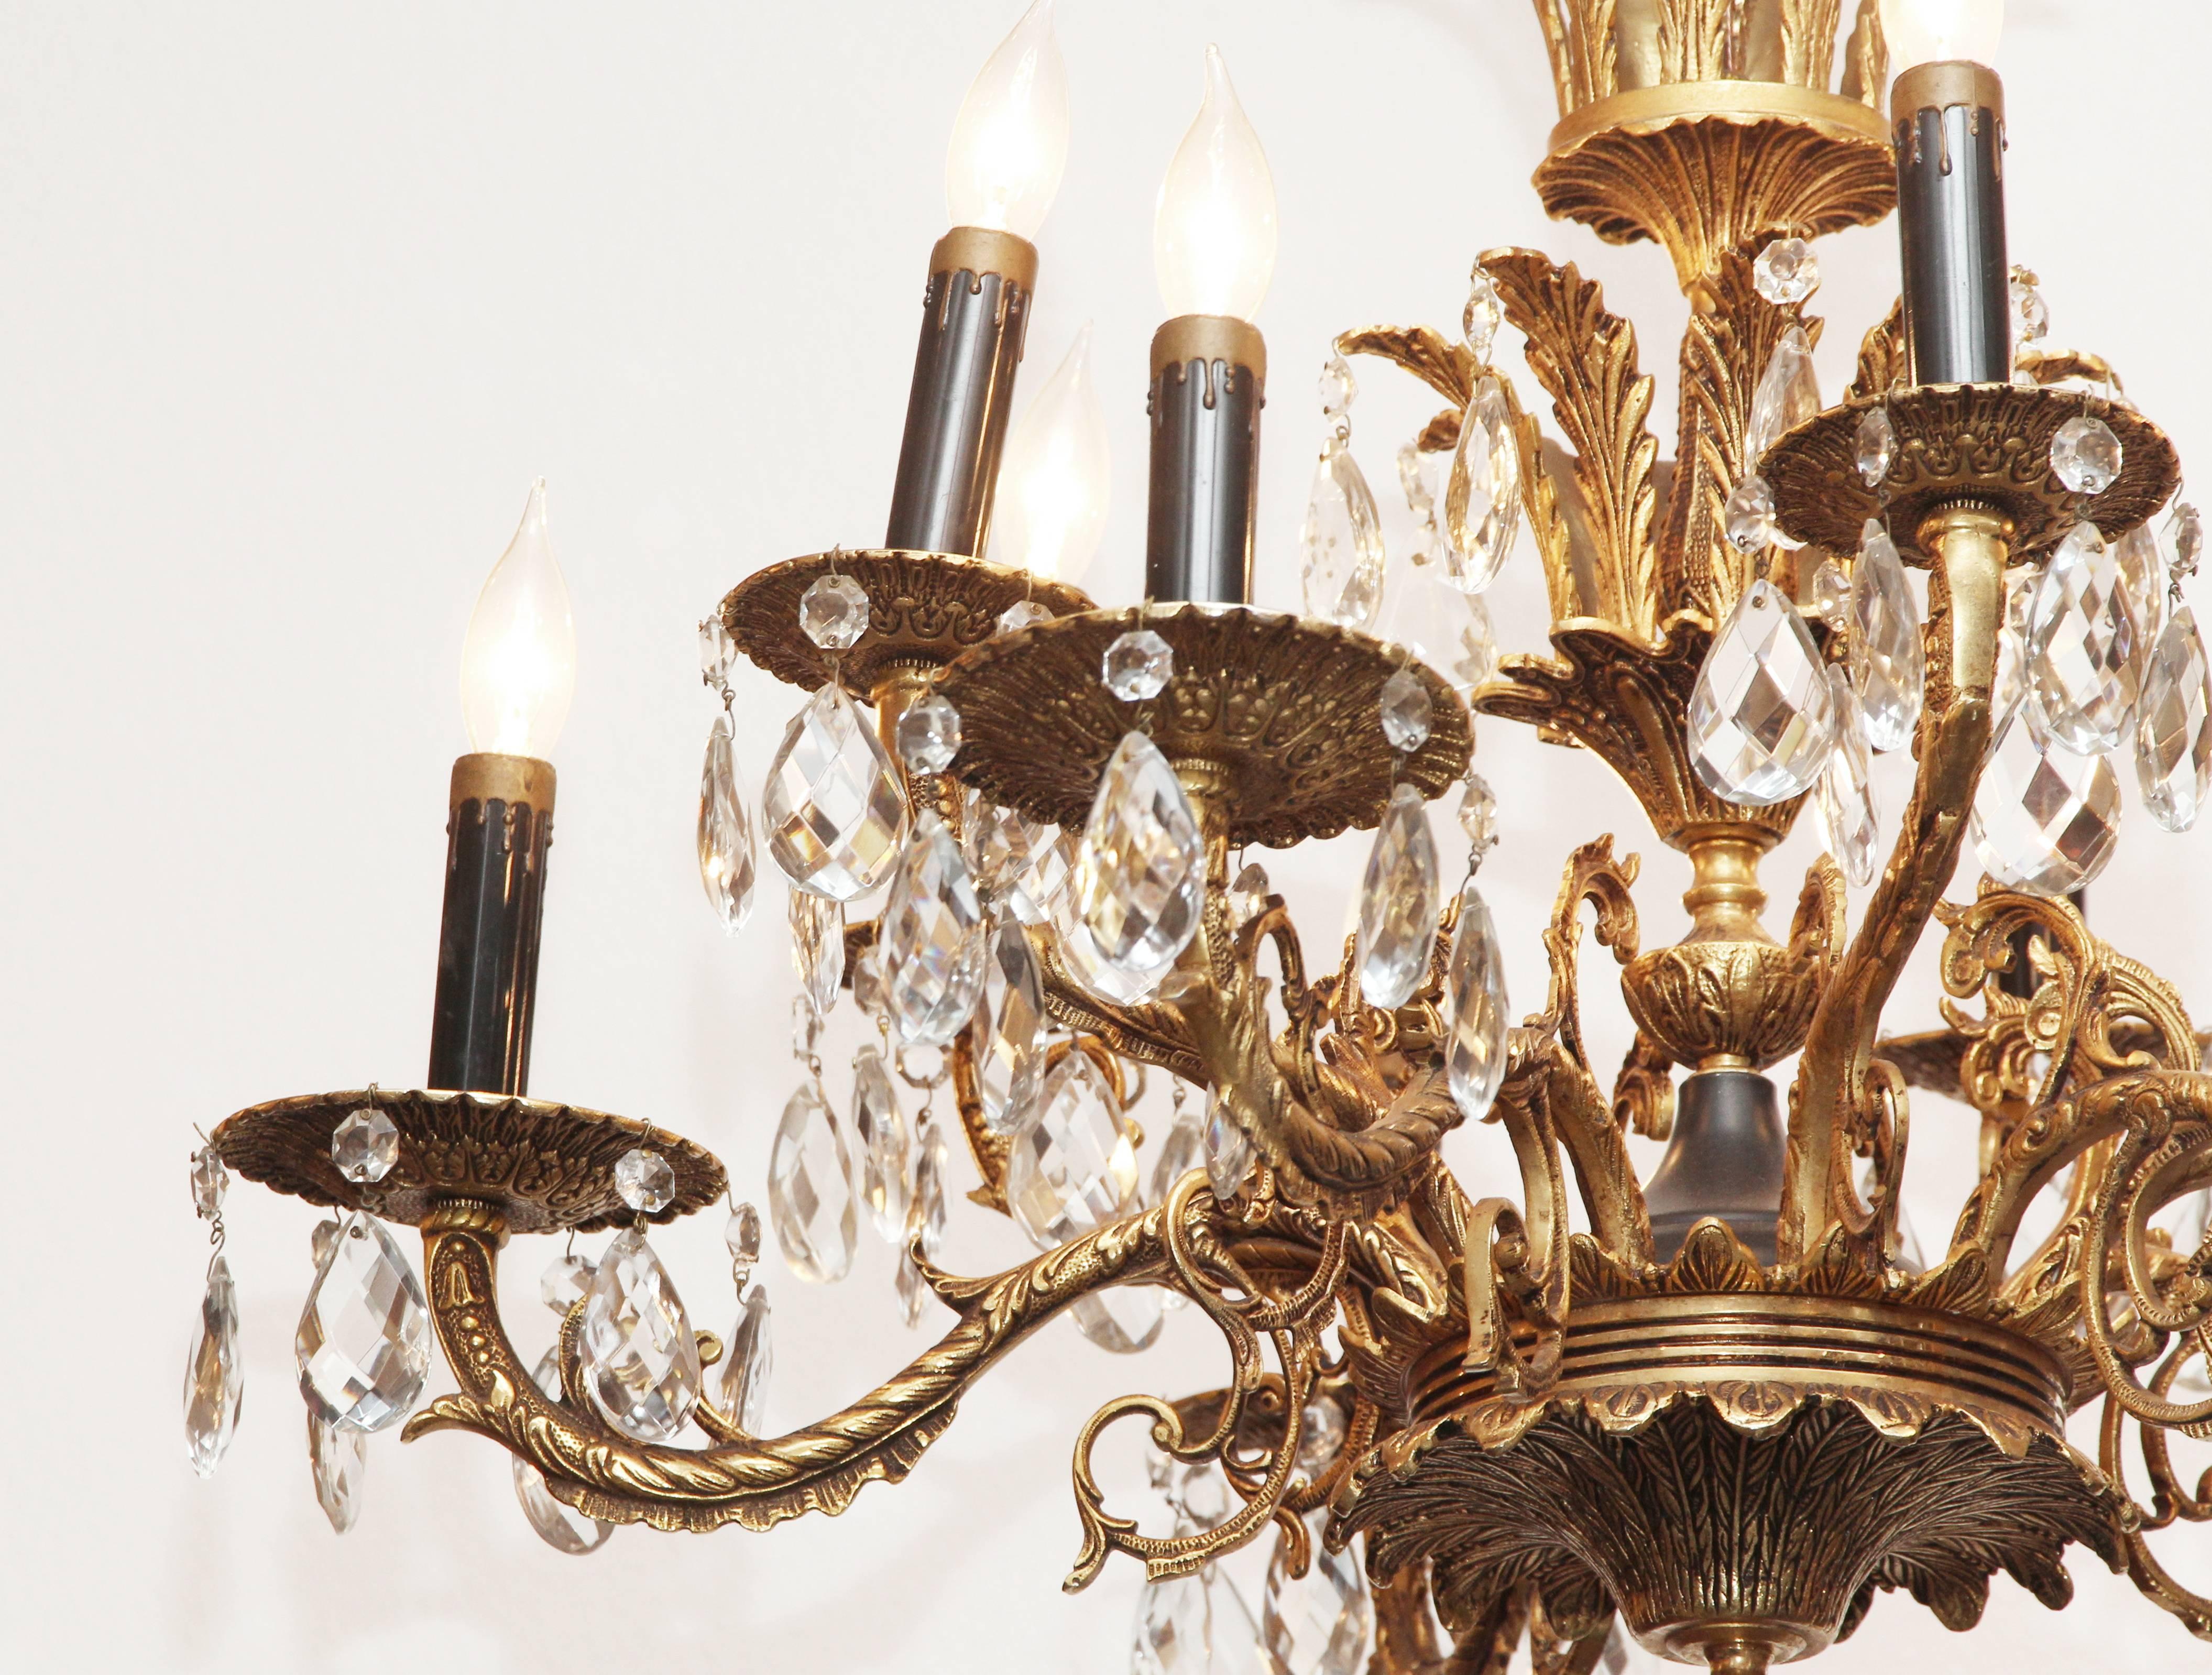 1940s ten-light ornate crystal chandelier with acanthus leaves. This can be seen at our 5 East 16th st Manhattan location.